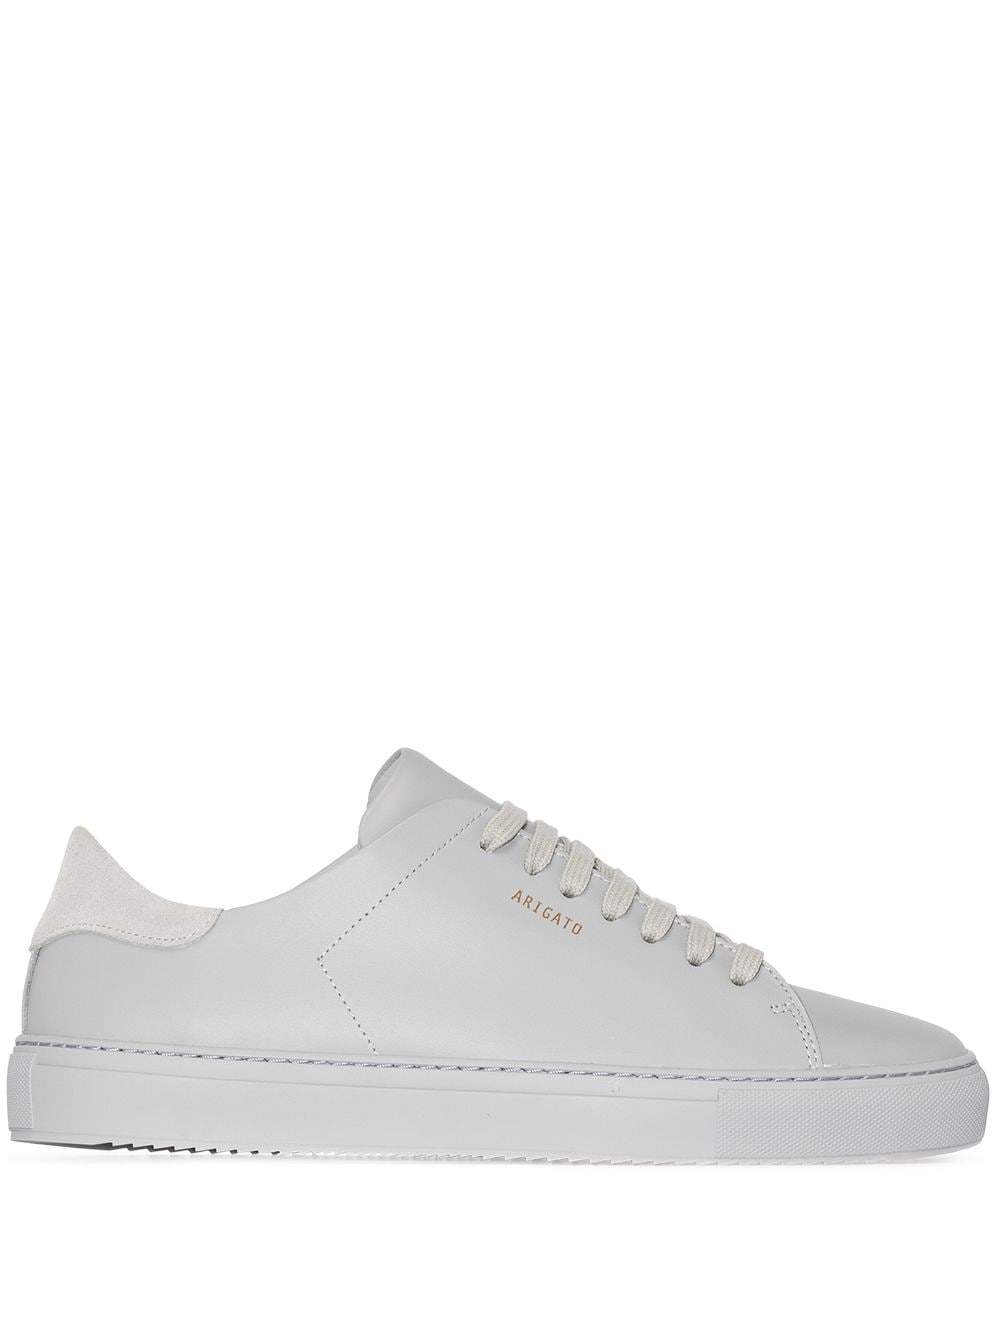 Clean 90 Leather Sneakers мъжки обувки Axel Arigato 844721622_40